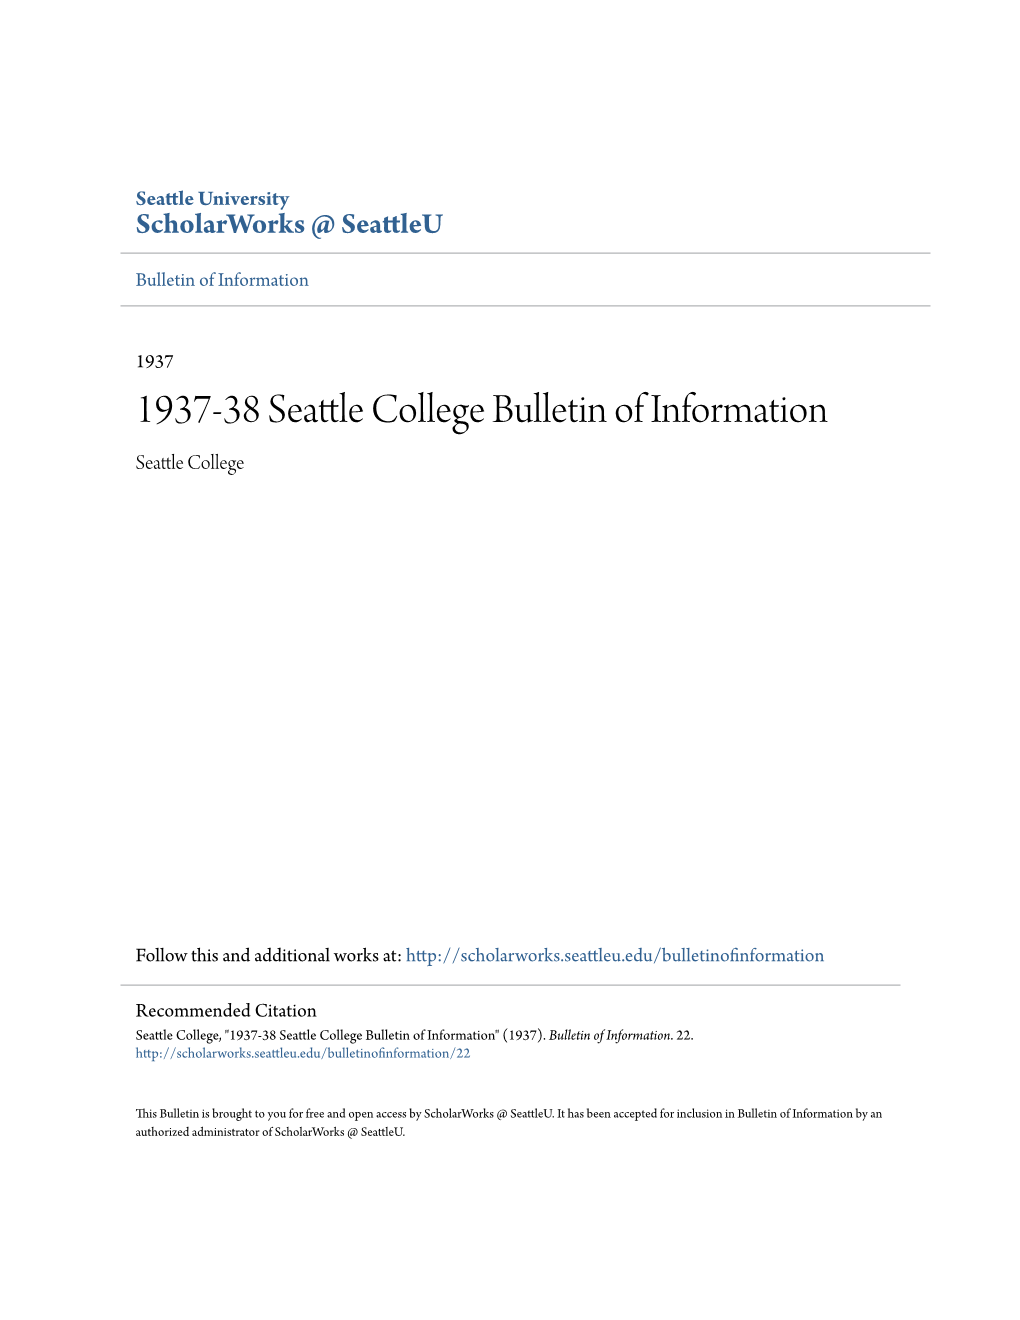 1937-38 Seattle College Bulletin of Information